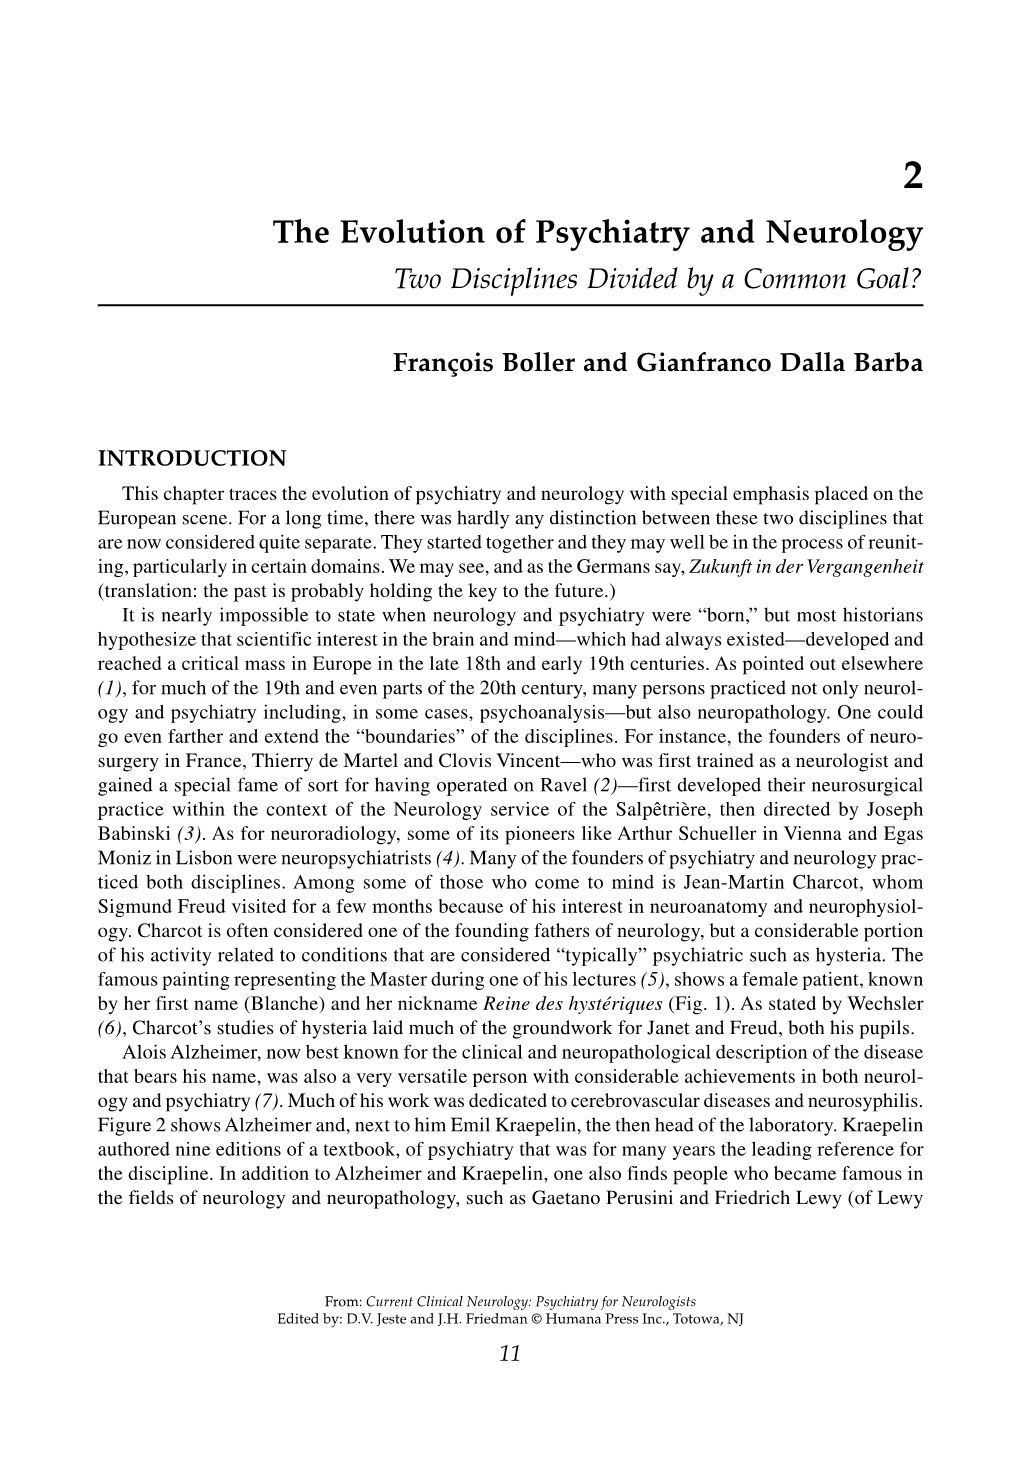 The Evolution of Psychiatry and Neurology Two Disciplines Divided by a Common Goal?